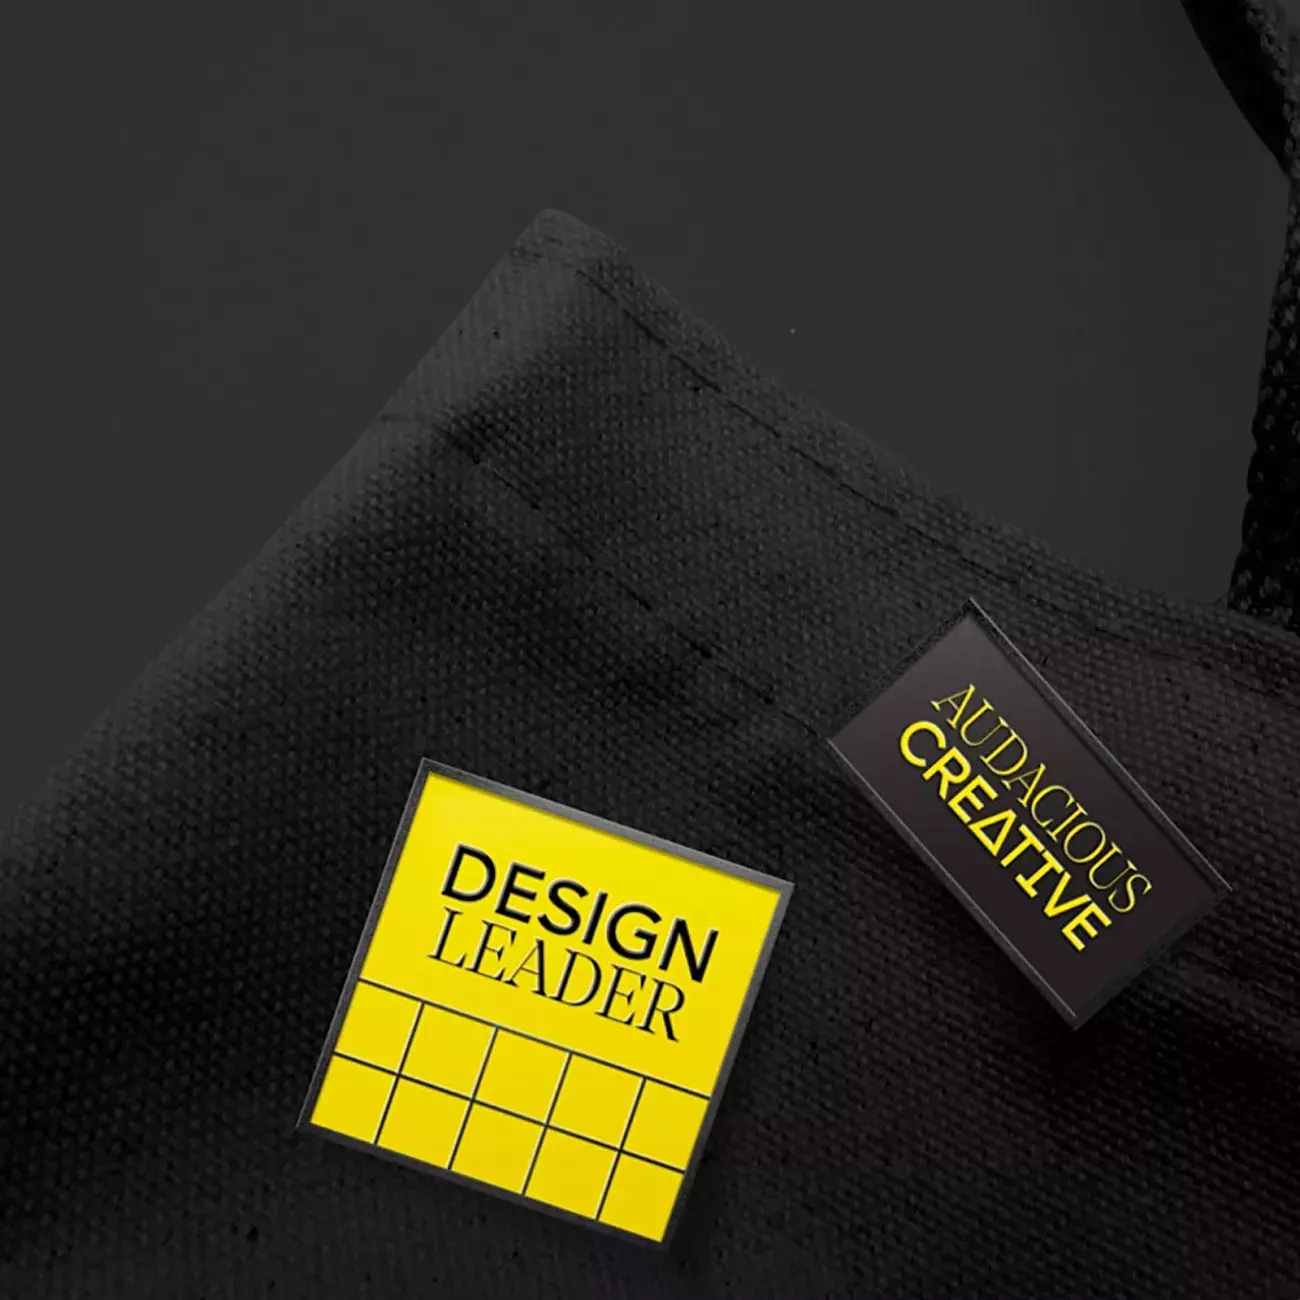 Future London Academy’s identity for Design Leaders embodies the future of leadership 